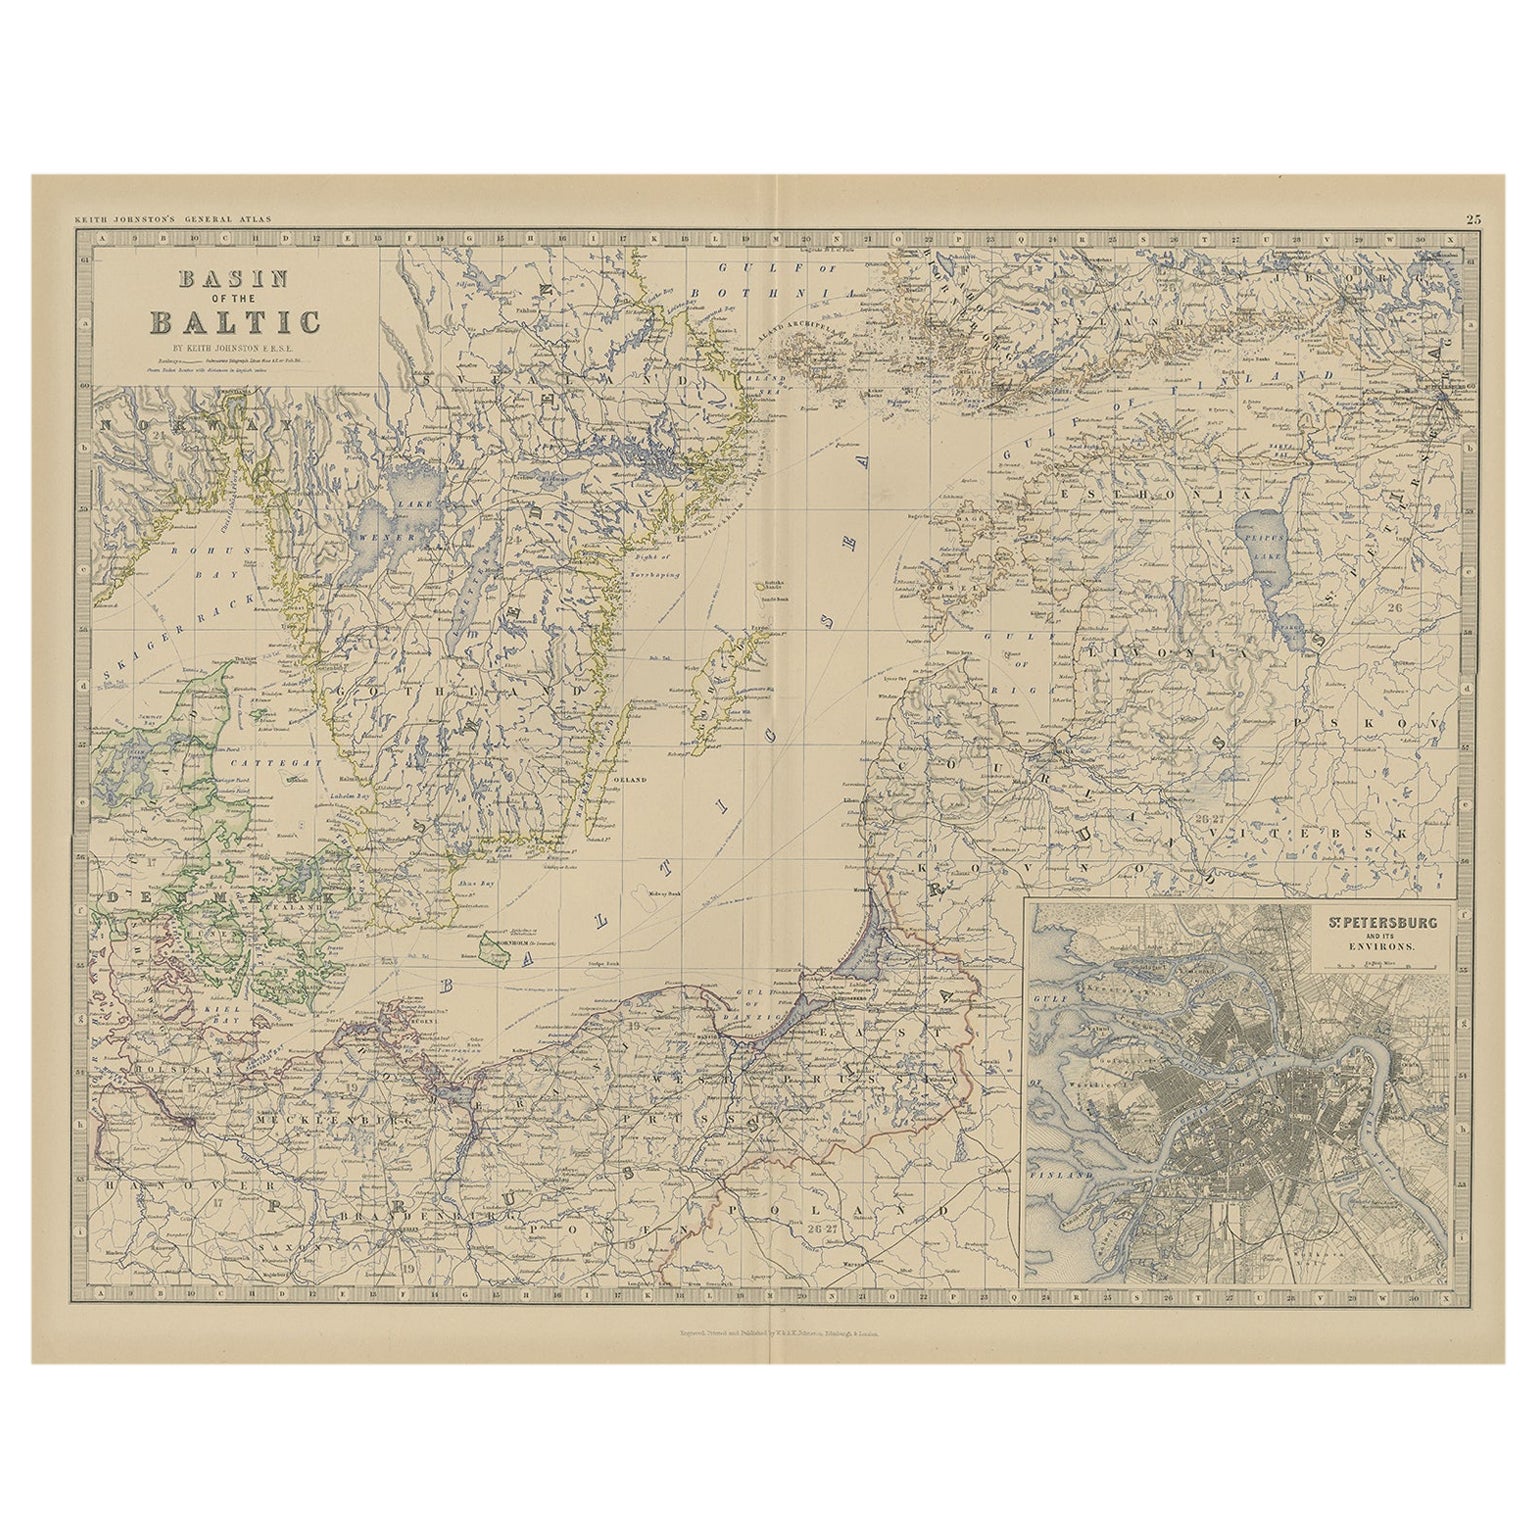 Old Map of the the Baltic Sea Region, Inset of St. Petersburg, 1882 For Sale